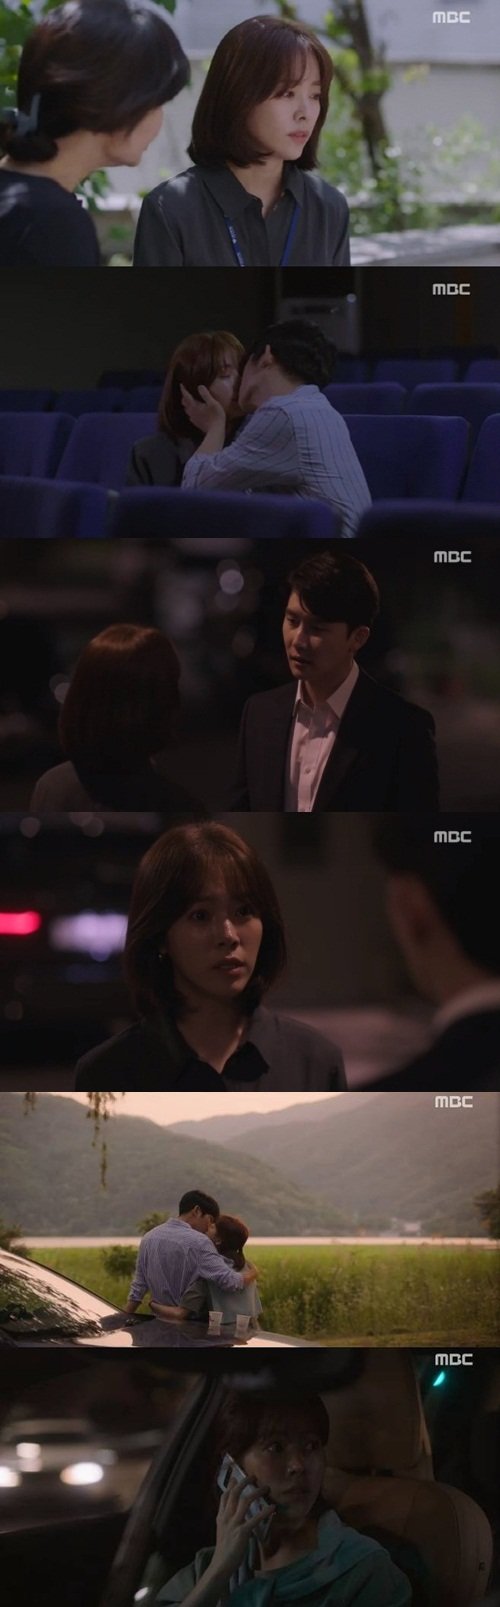 On the MBC drama Spring Night, which aired on the 3rd, Han Ji-min (Lee Jung-in) and Yoo Ji-Ho were pictured spending the night together.Kim Joonhan (Kwon Gi-seok) said he would come to Lee Sang-hee (Song Young-joo)s house in a bad way, and he was becoming more obsessed with not accepting the separation.Han Ji-min told his mother Gil Hae-yeon (Shin Hyung-sun) that Jeong Hae-in was a single woman. Gil Hae-yeon was embarrassed.I want my mom to meet me once, Han Ji-min said, venting his heartfelt feelings, I cant live without him now, Im sorry, he said, taking his luck.I was worried about Han Ji-min. I ran to the library. Han Ji-min was sitting alone crying. He warmly comforted me.If you can, dont cry alone where youre not, Im fine, because Im sure of my relationship with Mr. Jung-in, he said, giving me another smile with a love-filled poporo.Kim Joonhan found Han Ji-min and Jung Hae-in together, chasing them after him. Jung Hae-in drew a line.Still, Kim Joonhan ignored Jung Hae-in and failed to acknowledge his separation because of his pride.To such Kim Joonhan, Han Ji-min said, Do what you want, Ill deal with you any way I want, but not Yoo Ji-Ho.If you make this person difficult, you will do anything. Han Ji-min and Jeong Hae-in went out with their son, Haian (Jung Eun-woo); the three enjoyed their daily happiness by spending a busy time.Han Ji-min confided in Haian that he wanted to be Jung Eun-woo mother and Haian was so happy, saying, Are you really coming to us?At this time, Song Seung-hwan (Lee Tae-hak) received a photo from Kim Chang-hwan (Kwon Young-guk), the father of Kim Joonhan, where he had images of Jeong Hae-in and Haian.Knowing the unmarried woman: Buzzy, he called Han Ji-min, saying, Tell him to come home right away.In addition, Kim Joon Han asked Kim Chang-hwan to guarantee his position after his retirement and asked him to push his relationship with Han Ji-min.